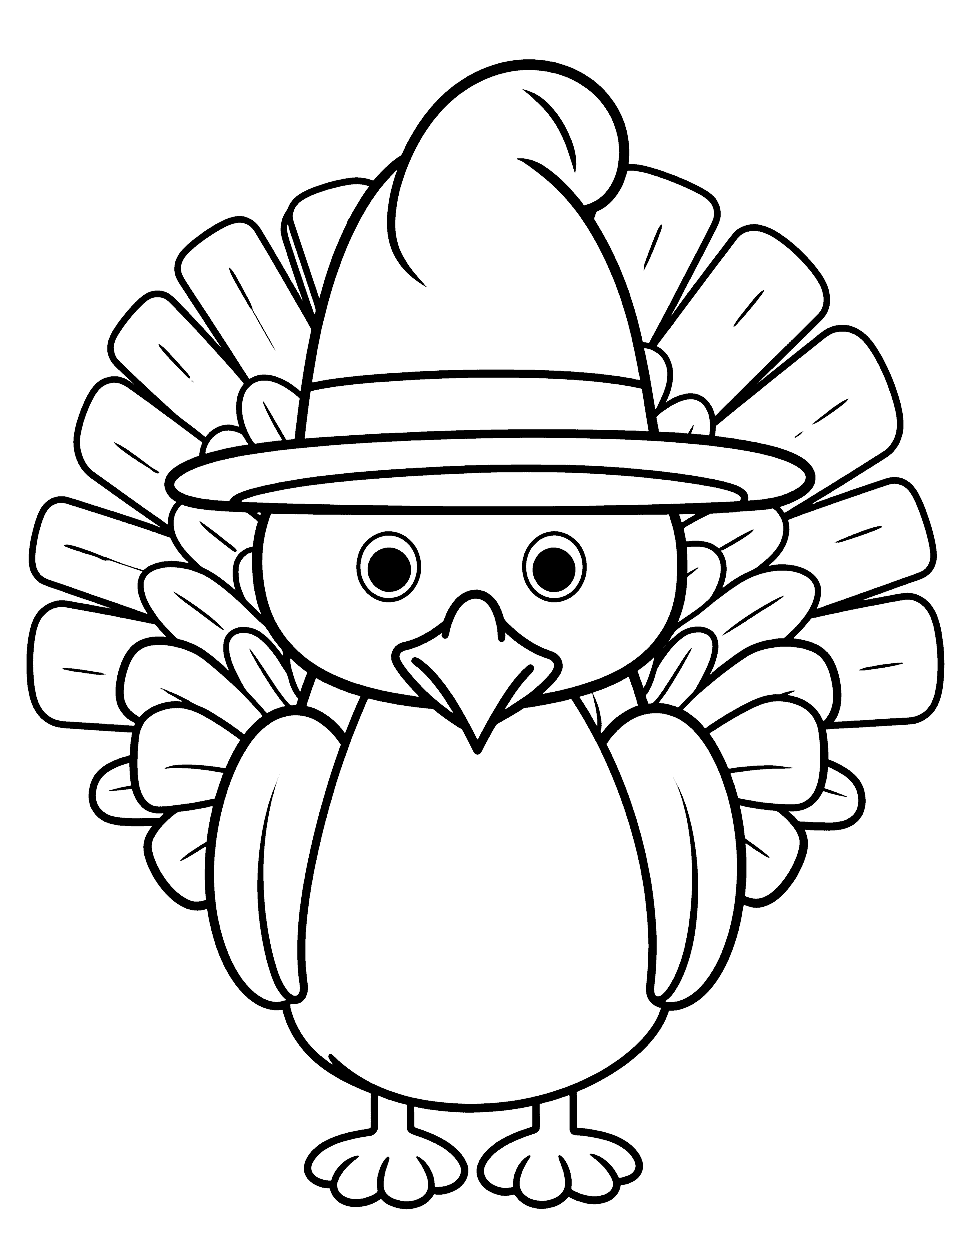 Cute Turkey With a Pilgrim Hat Thanksgiving Coloring Page - A lovable, big-eyed turkey donning a pilgrim hat, perfect for young kids to color.